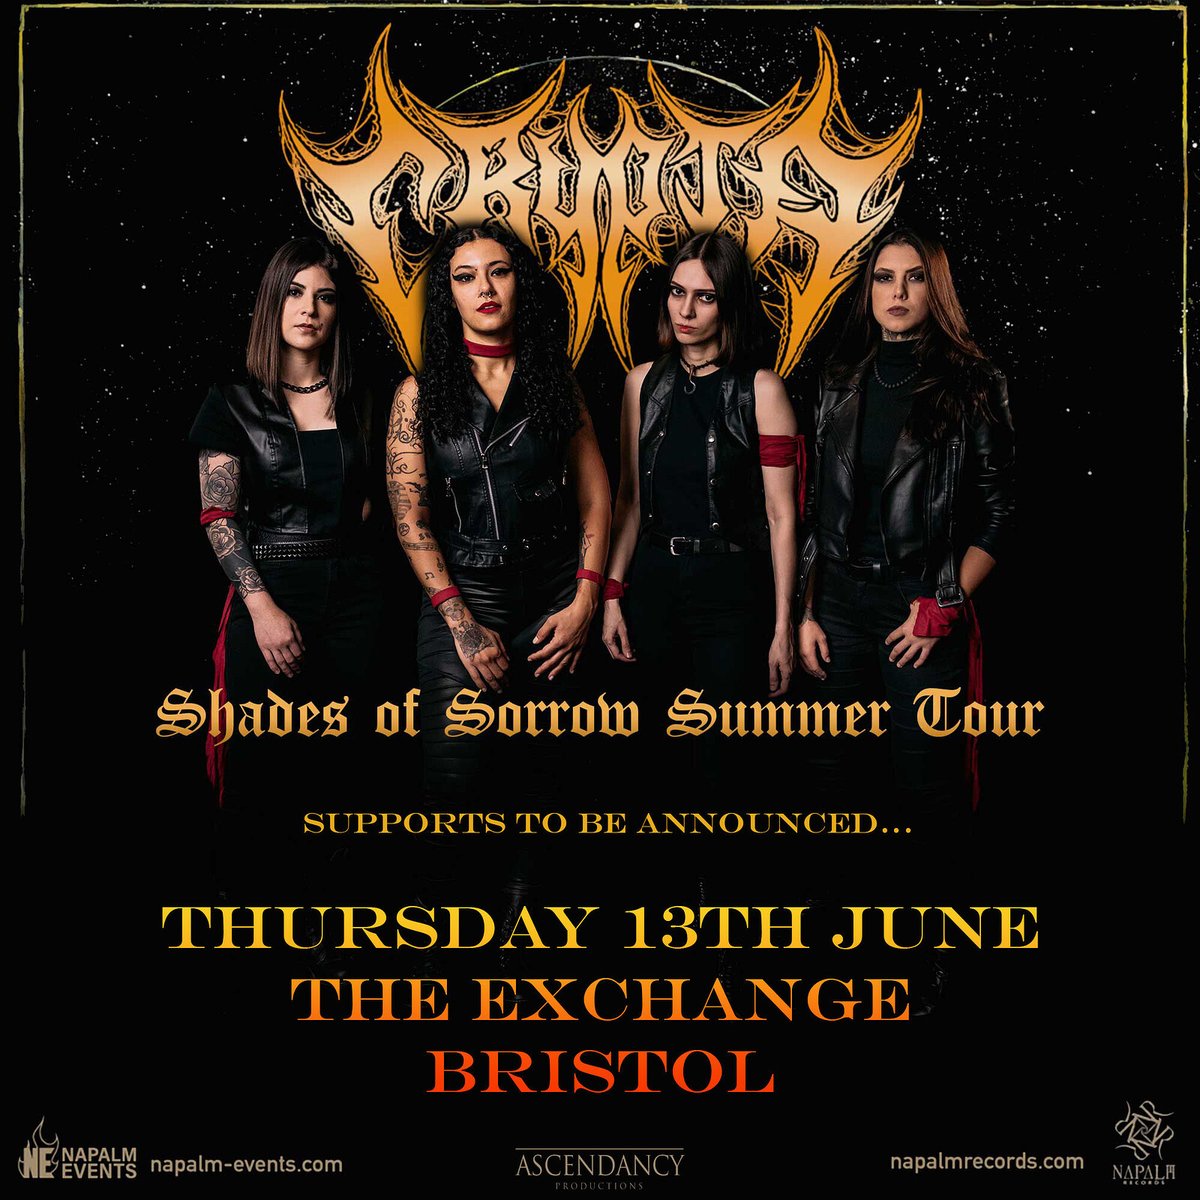 Brazilian Death-Metallers CRYPTA head to Bristol this June on their 'Shades Of Sorrow' summer tour! // Save a fiver by getting a ticket in advance hdfst.uk/e107628